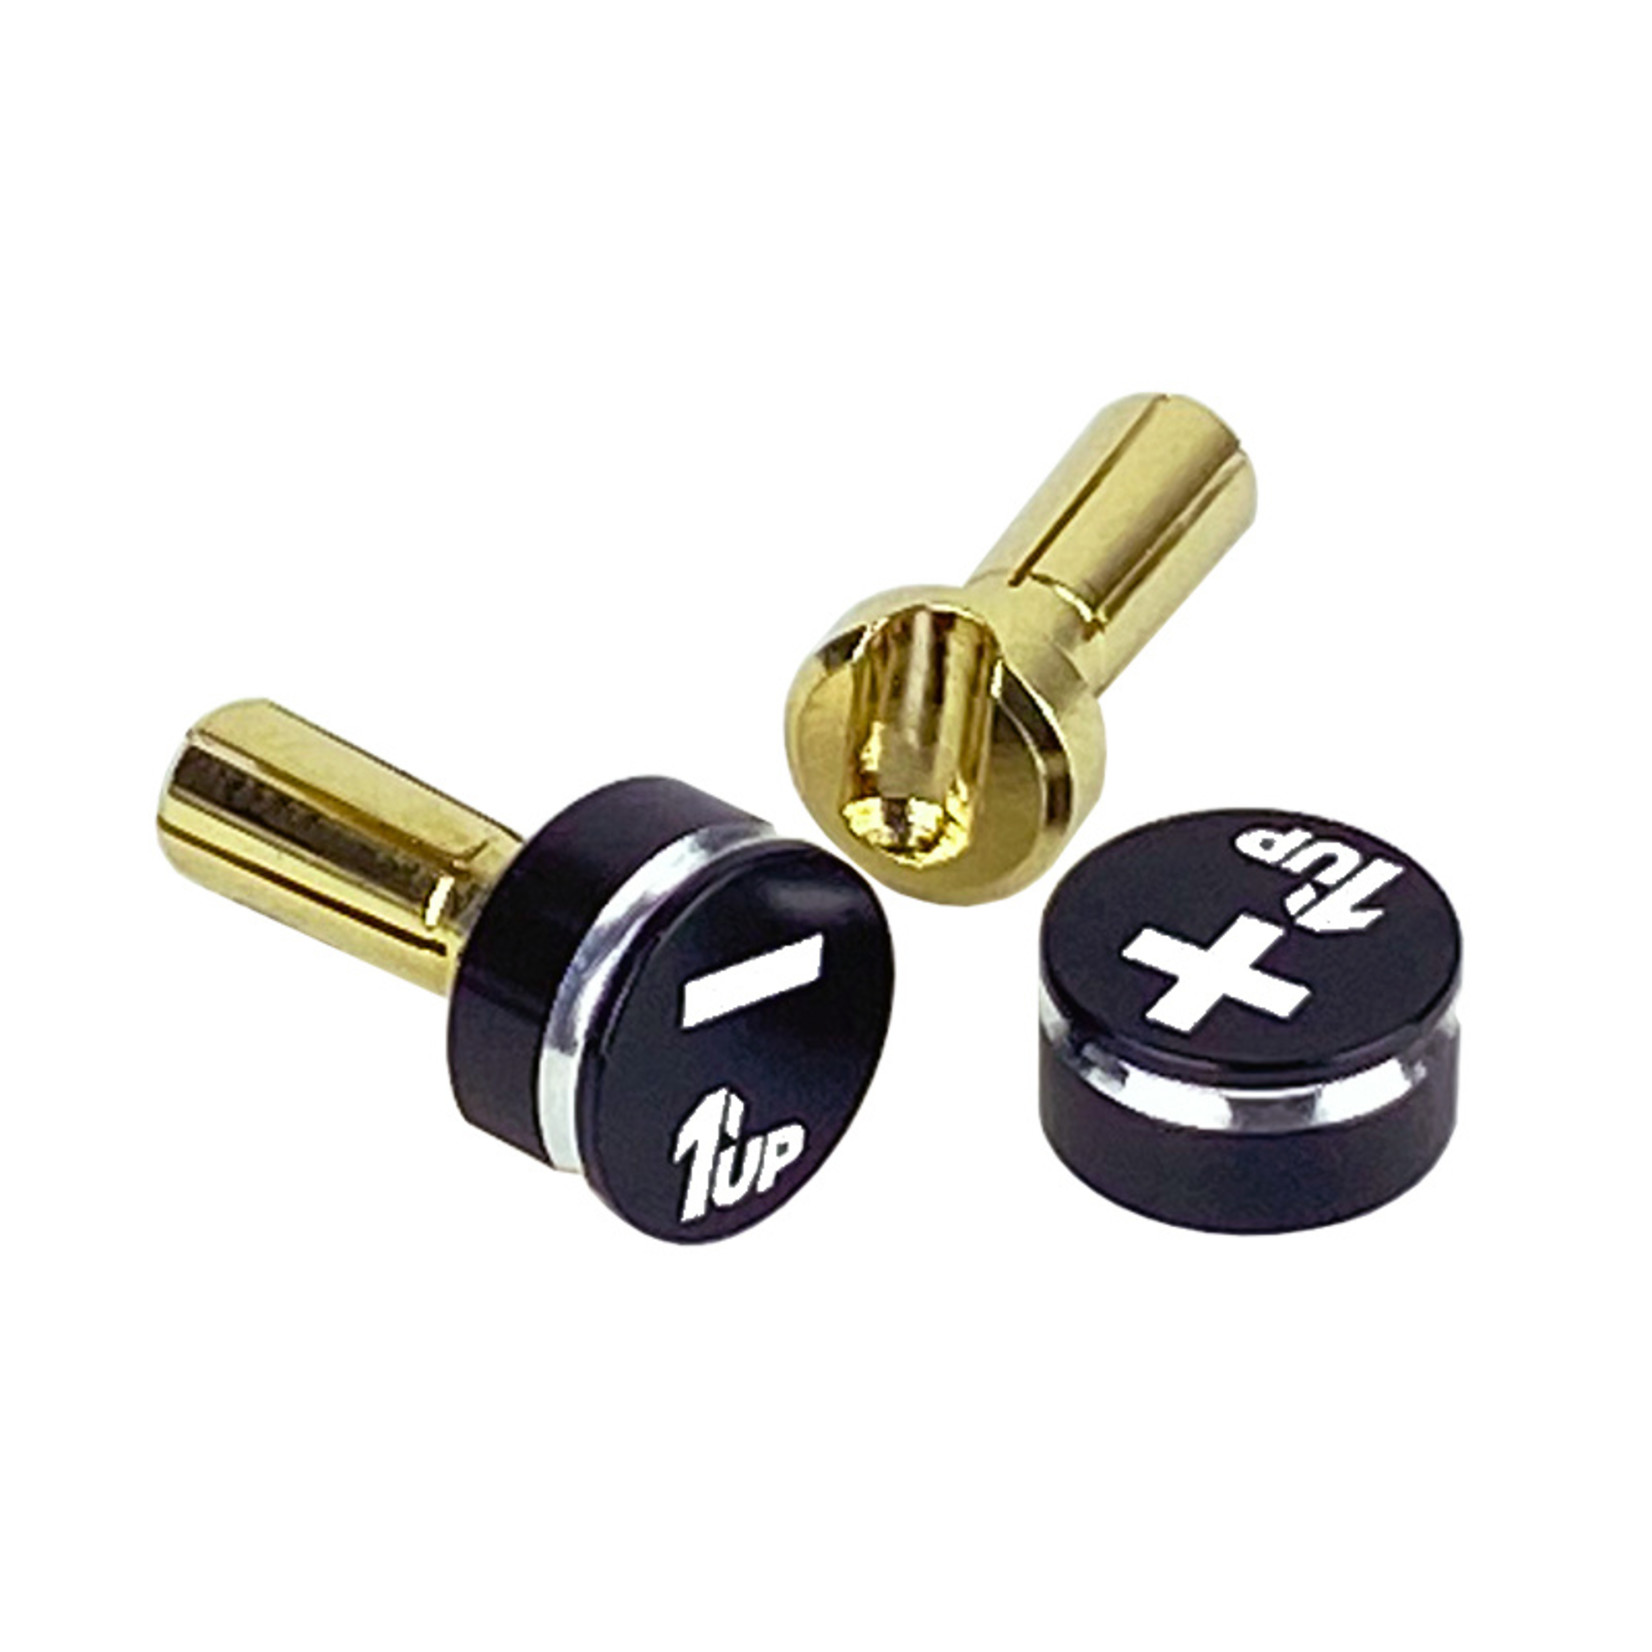 1UP Racing LowPro Bullet Plugs & Grips, 4mm, Stealth